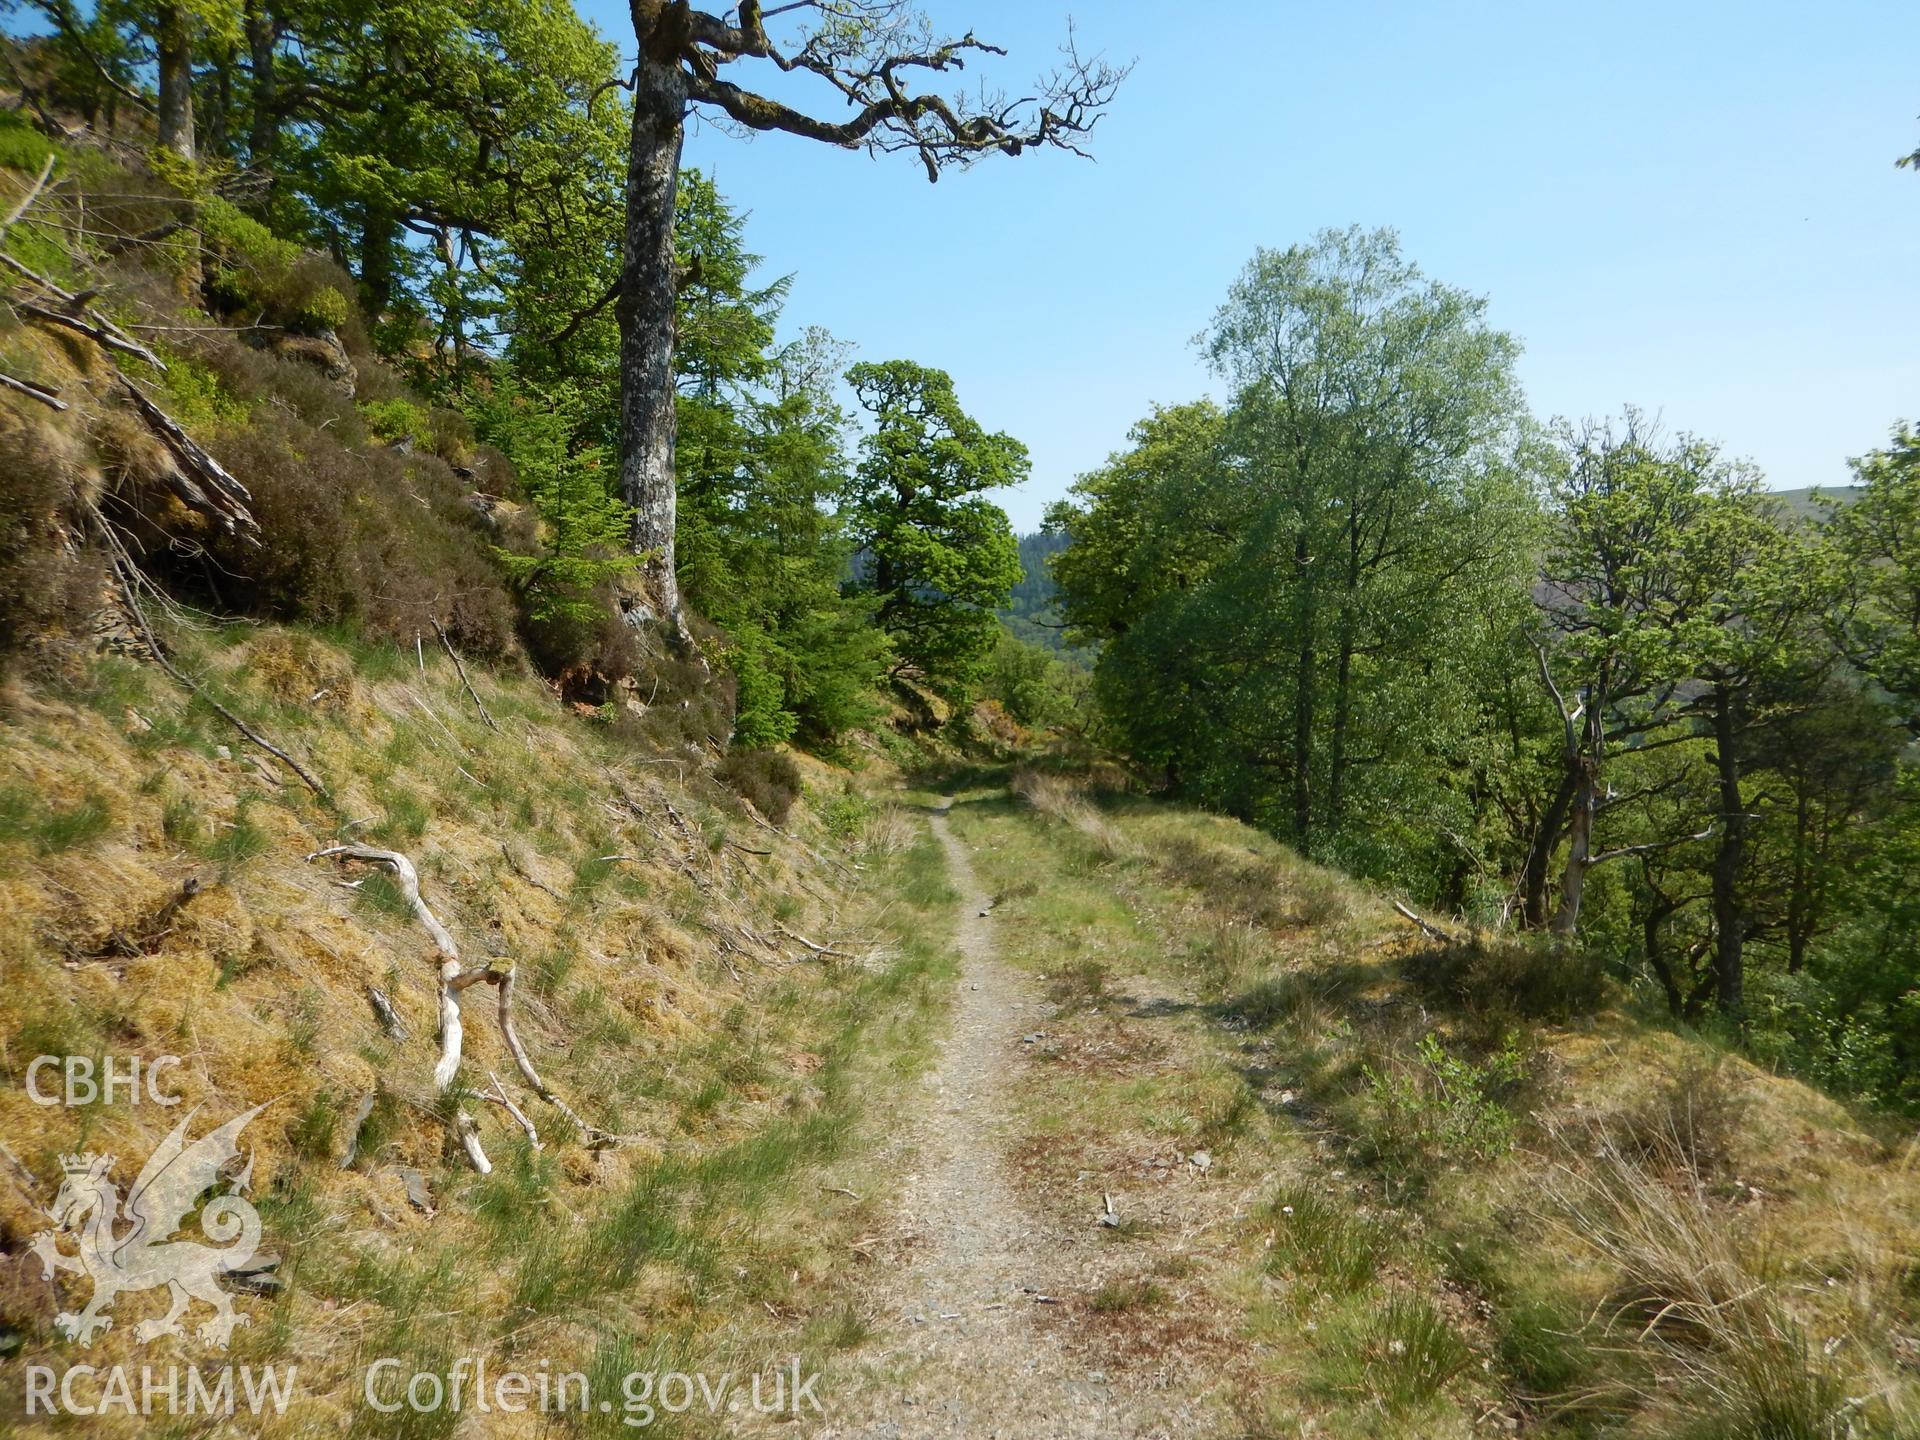 View along forestry track, looking north-east. Photographed as part of Archaeological Desk Based Assessment of Afon Claerwen, Elan Valley, Rhayader, Powys. Assessment conducted by Archaeology Wales in 2018. Report no. 1681. Project no. 2573.